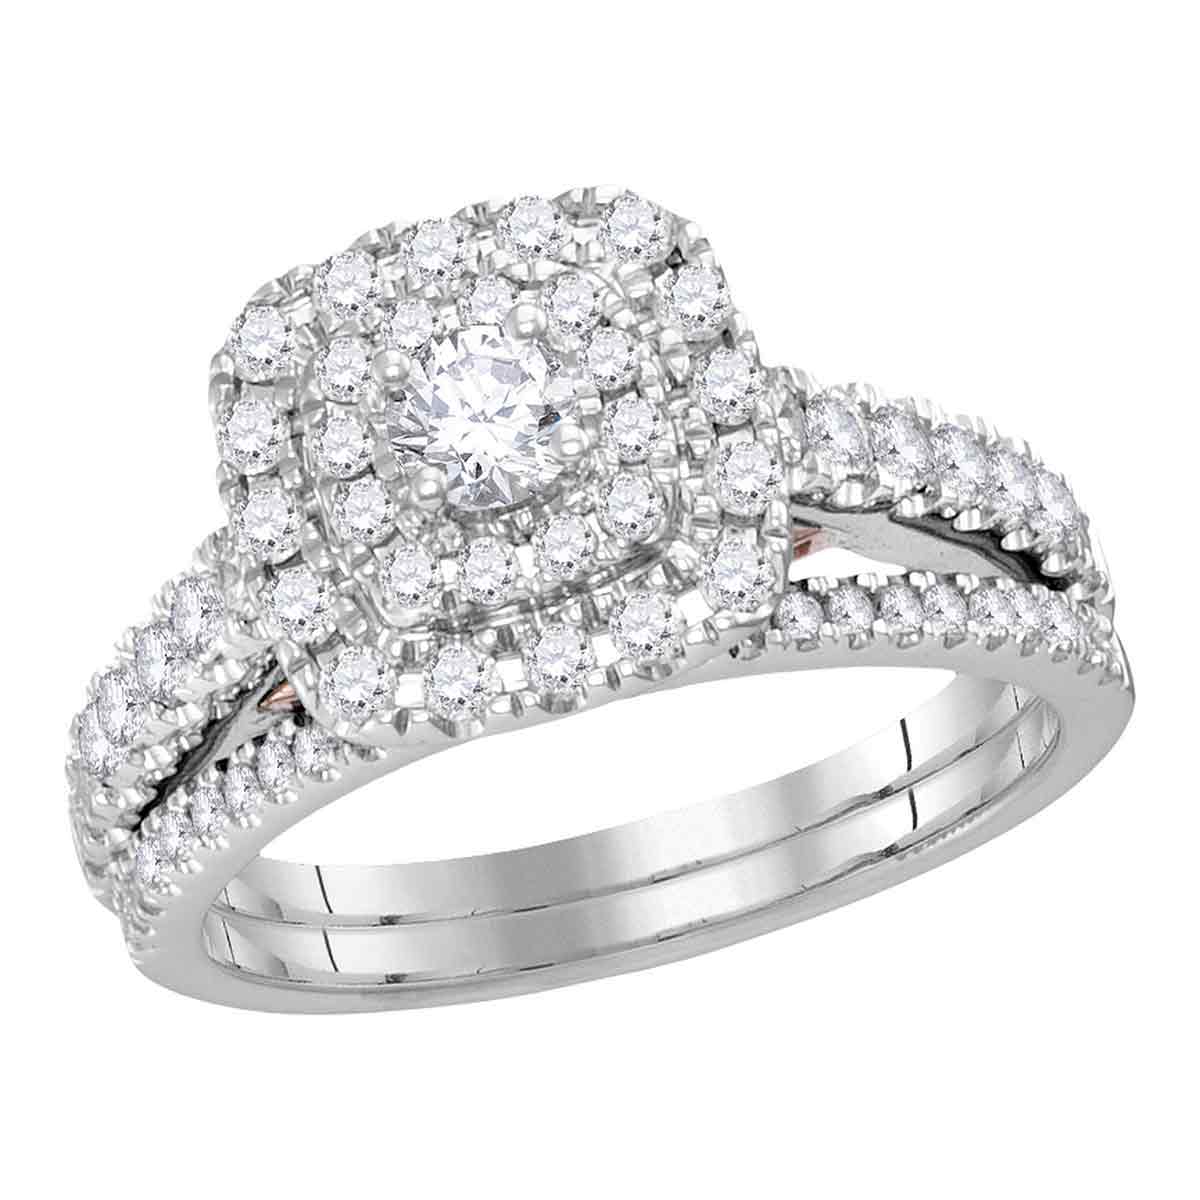 Dentelle Ring, White Gold And Diamonds - Jewelry - Categories